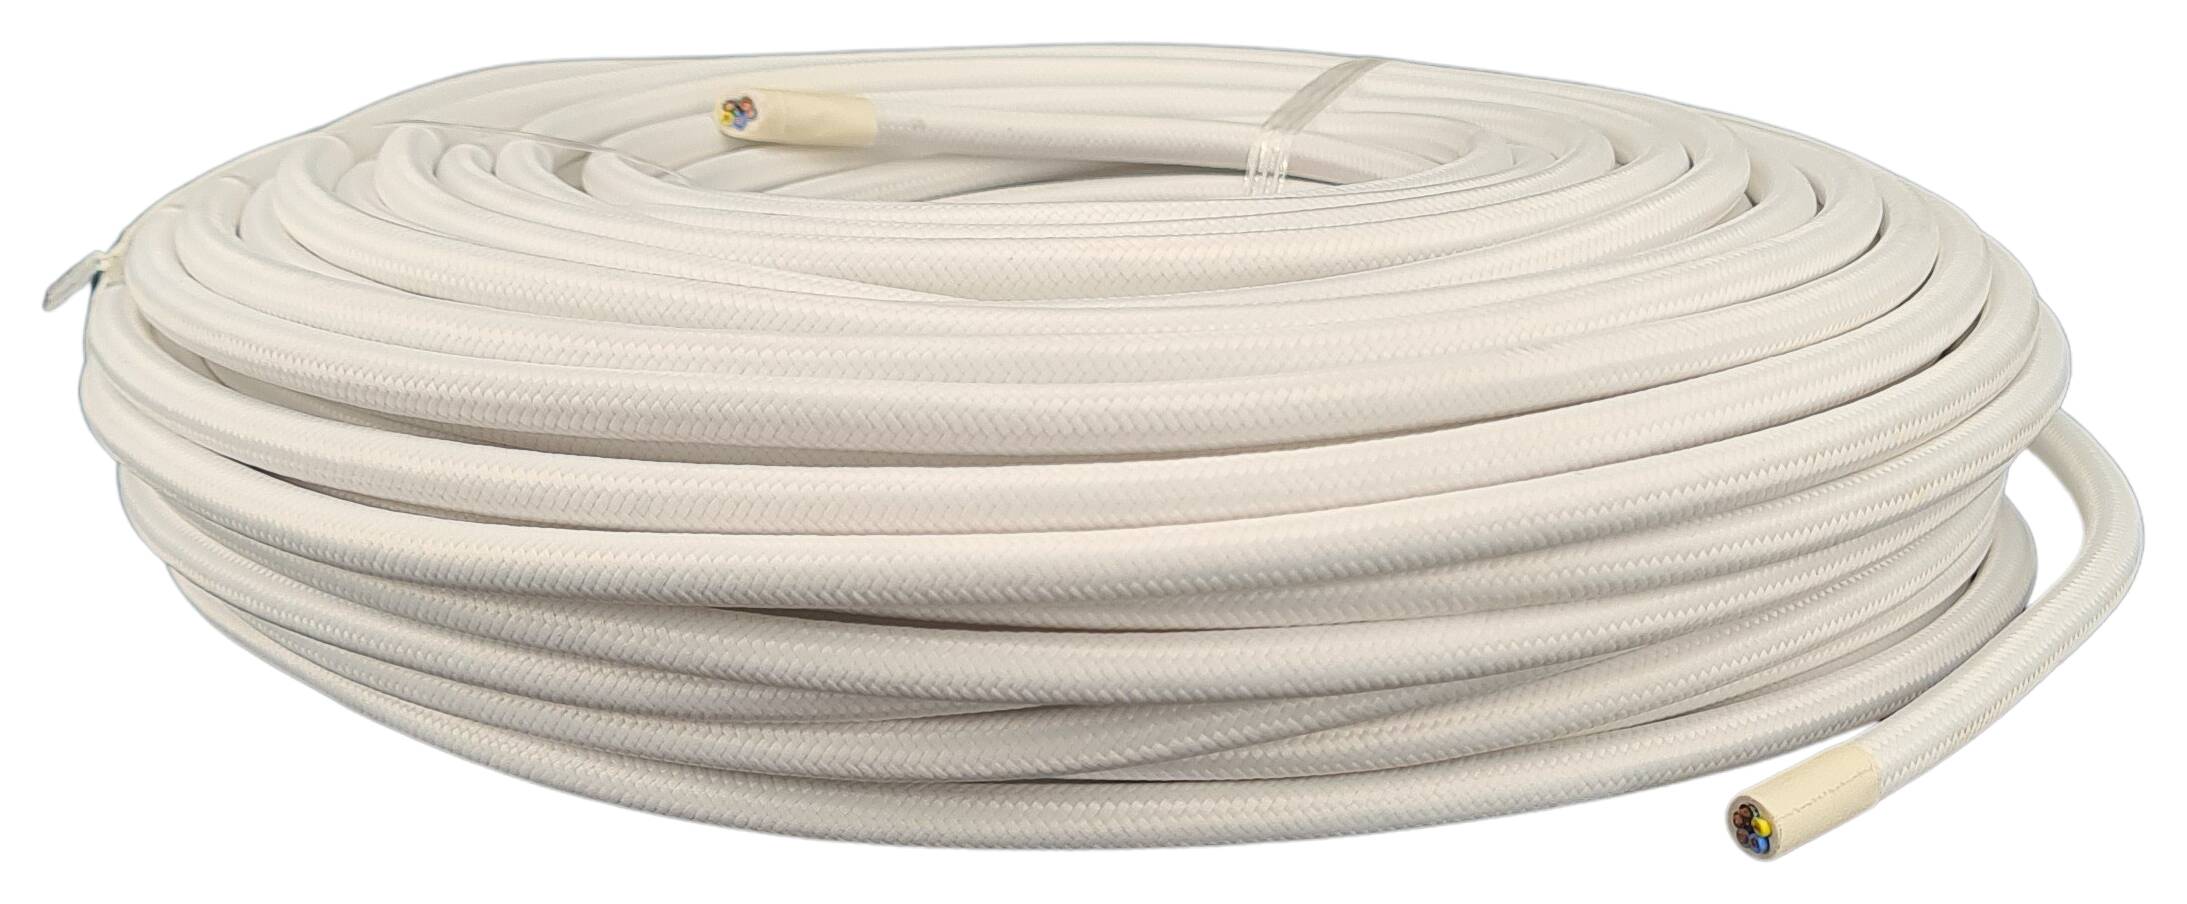 cable w. wire 5G 0,75 H03VV-F PVC textile coated RAL 9016 white